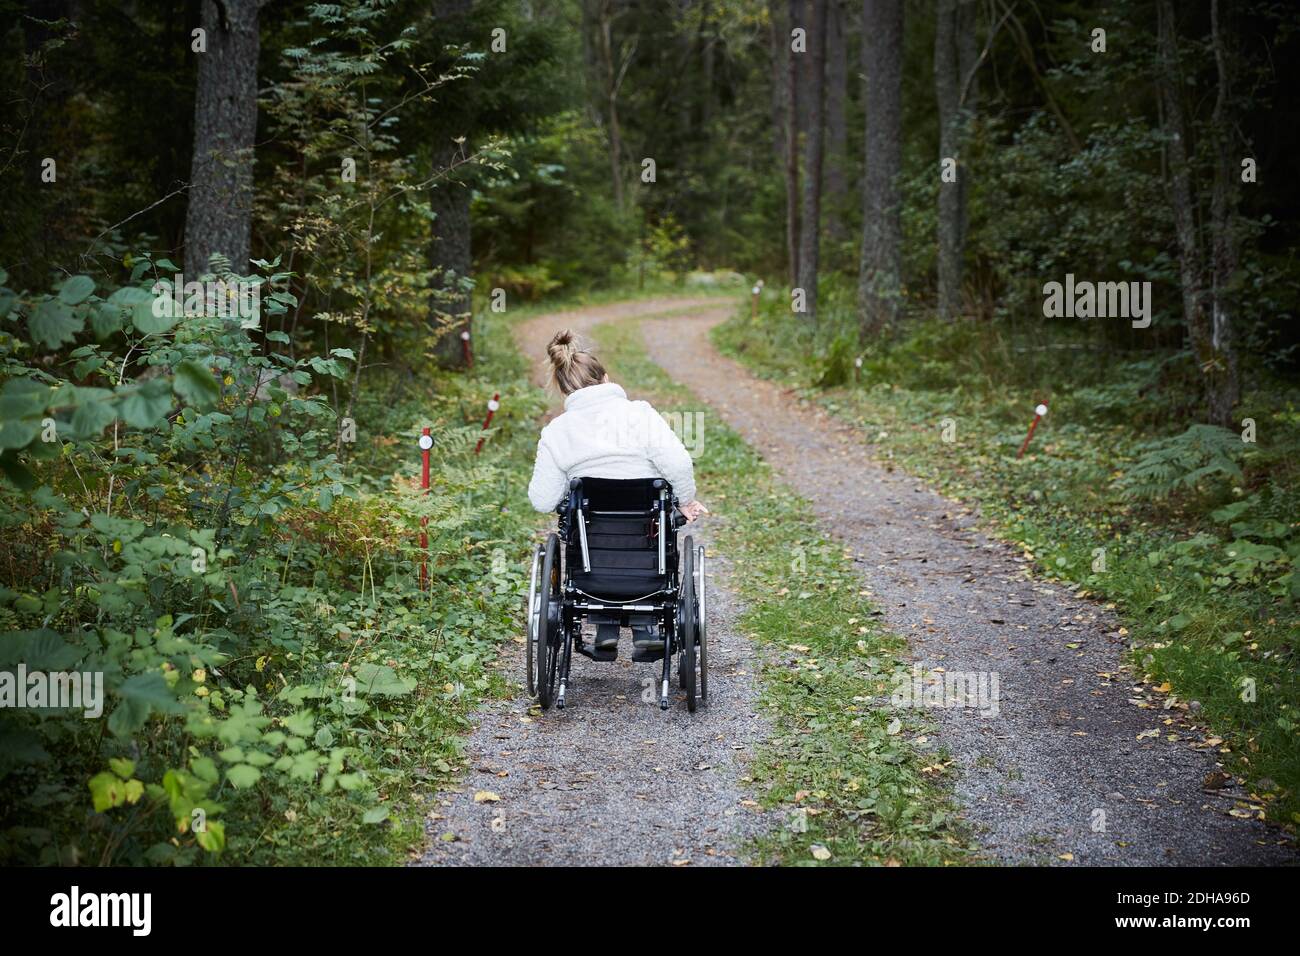 Rear view of disabled woman in wheelchair on dirt road at forest Stock Photo